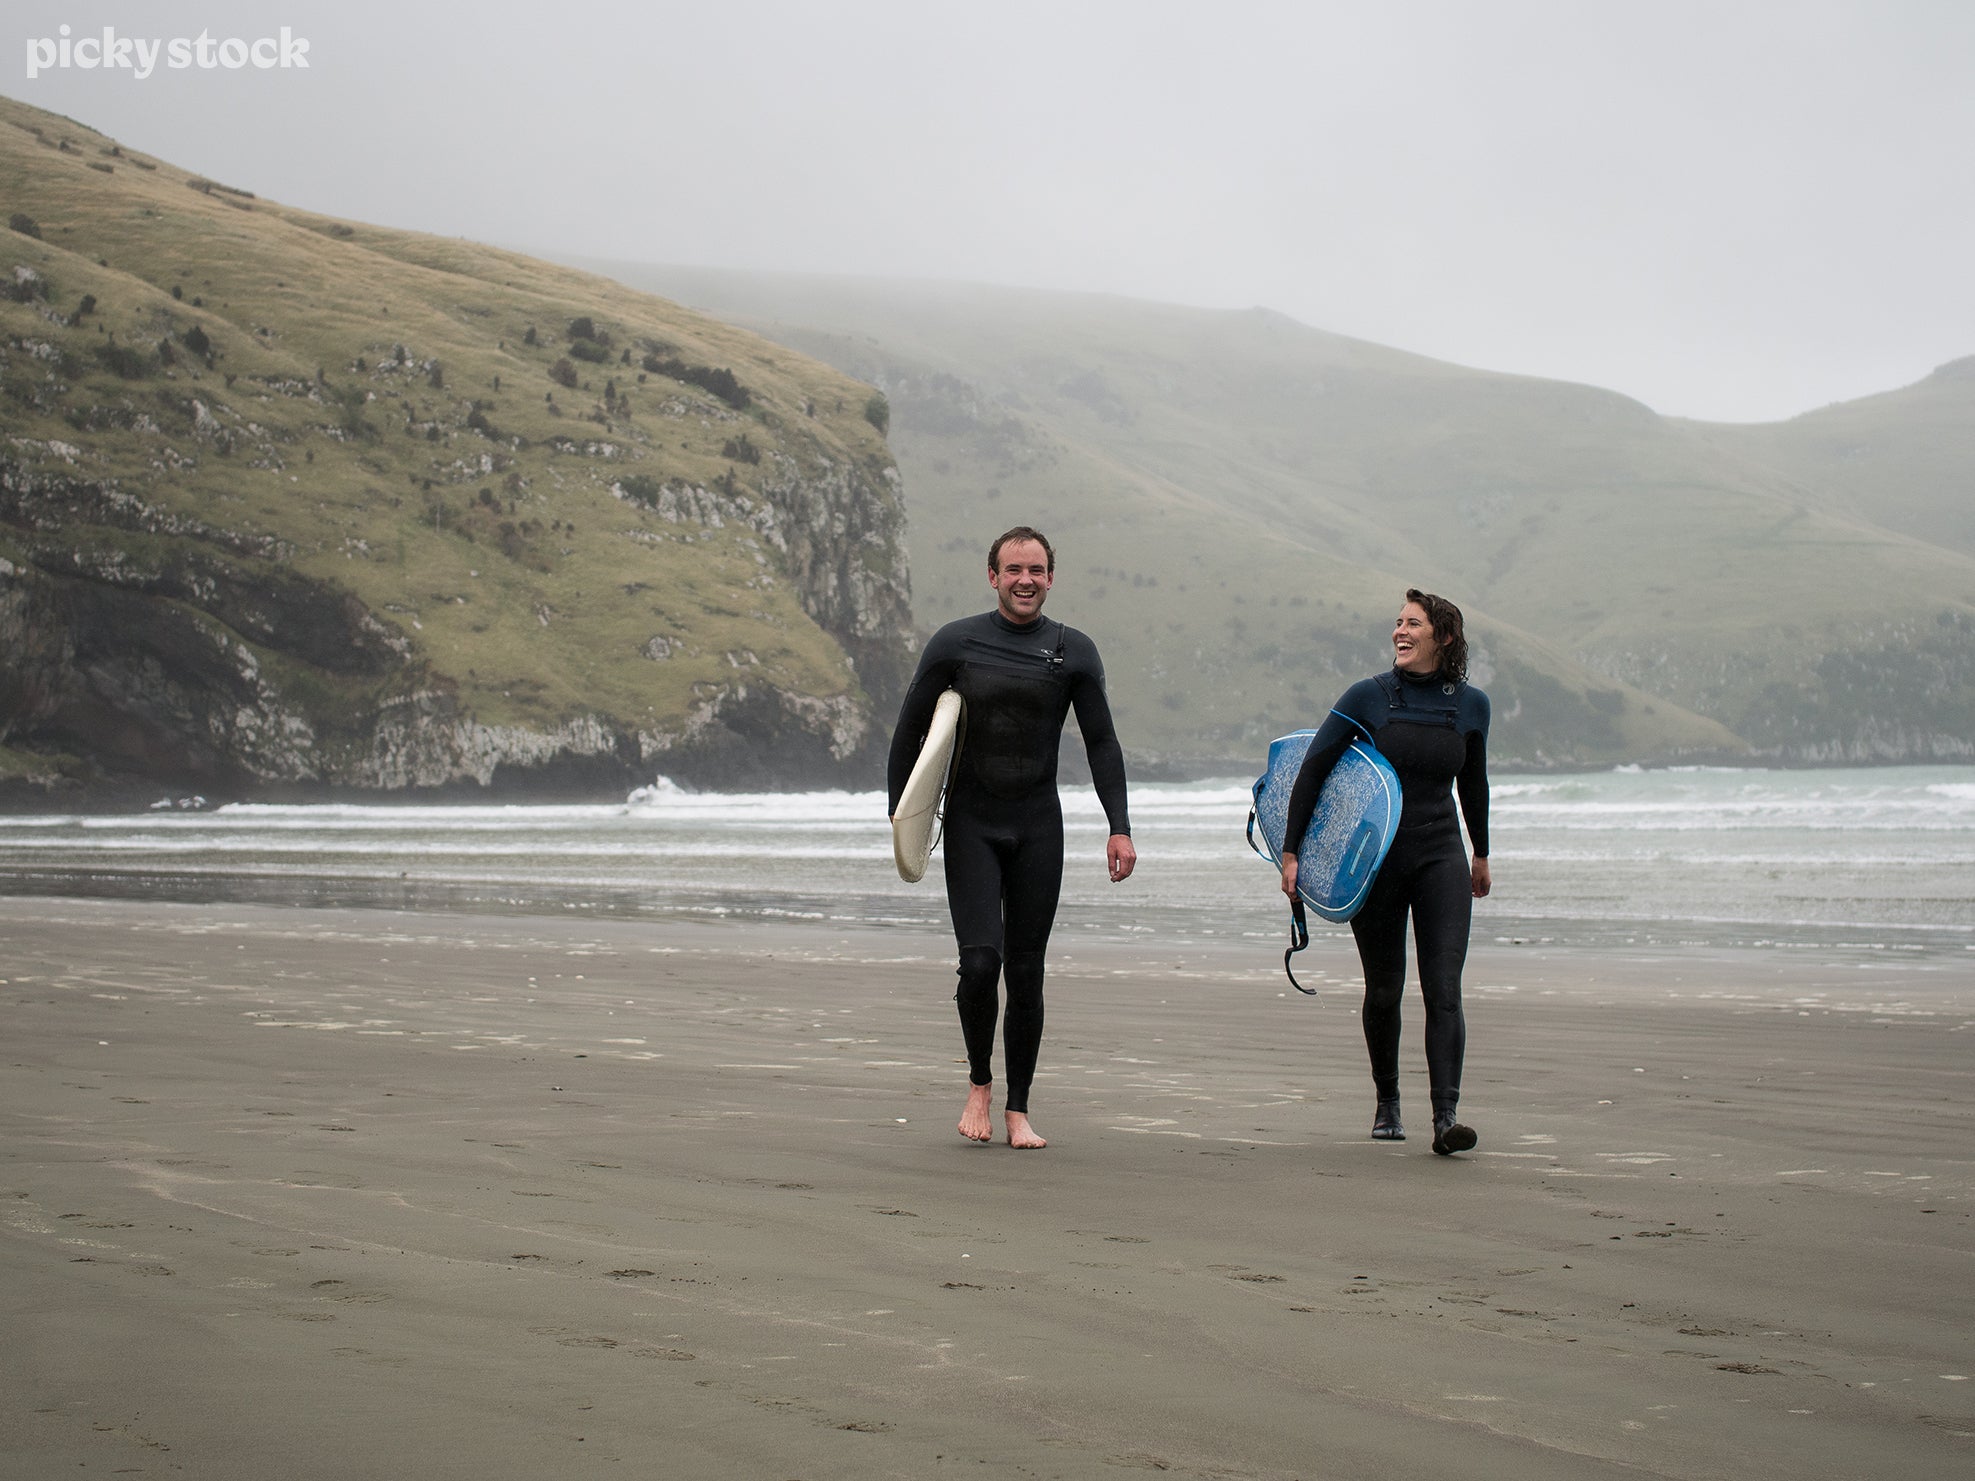 Man and woman walking holding surfboards along high tide line. Foggy low cloud day. Early morning or early evening. Black sand beach. 